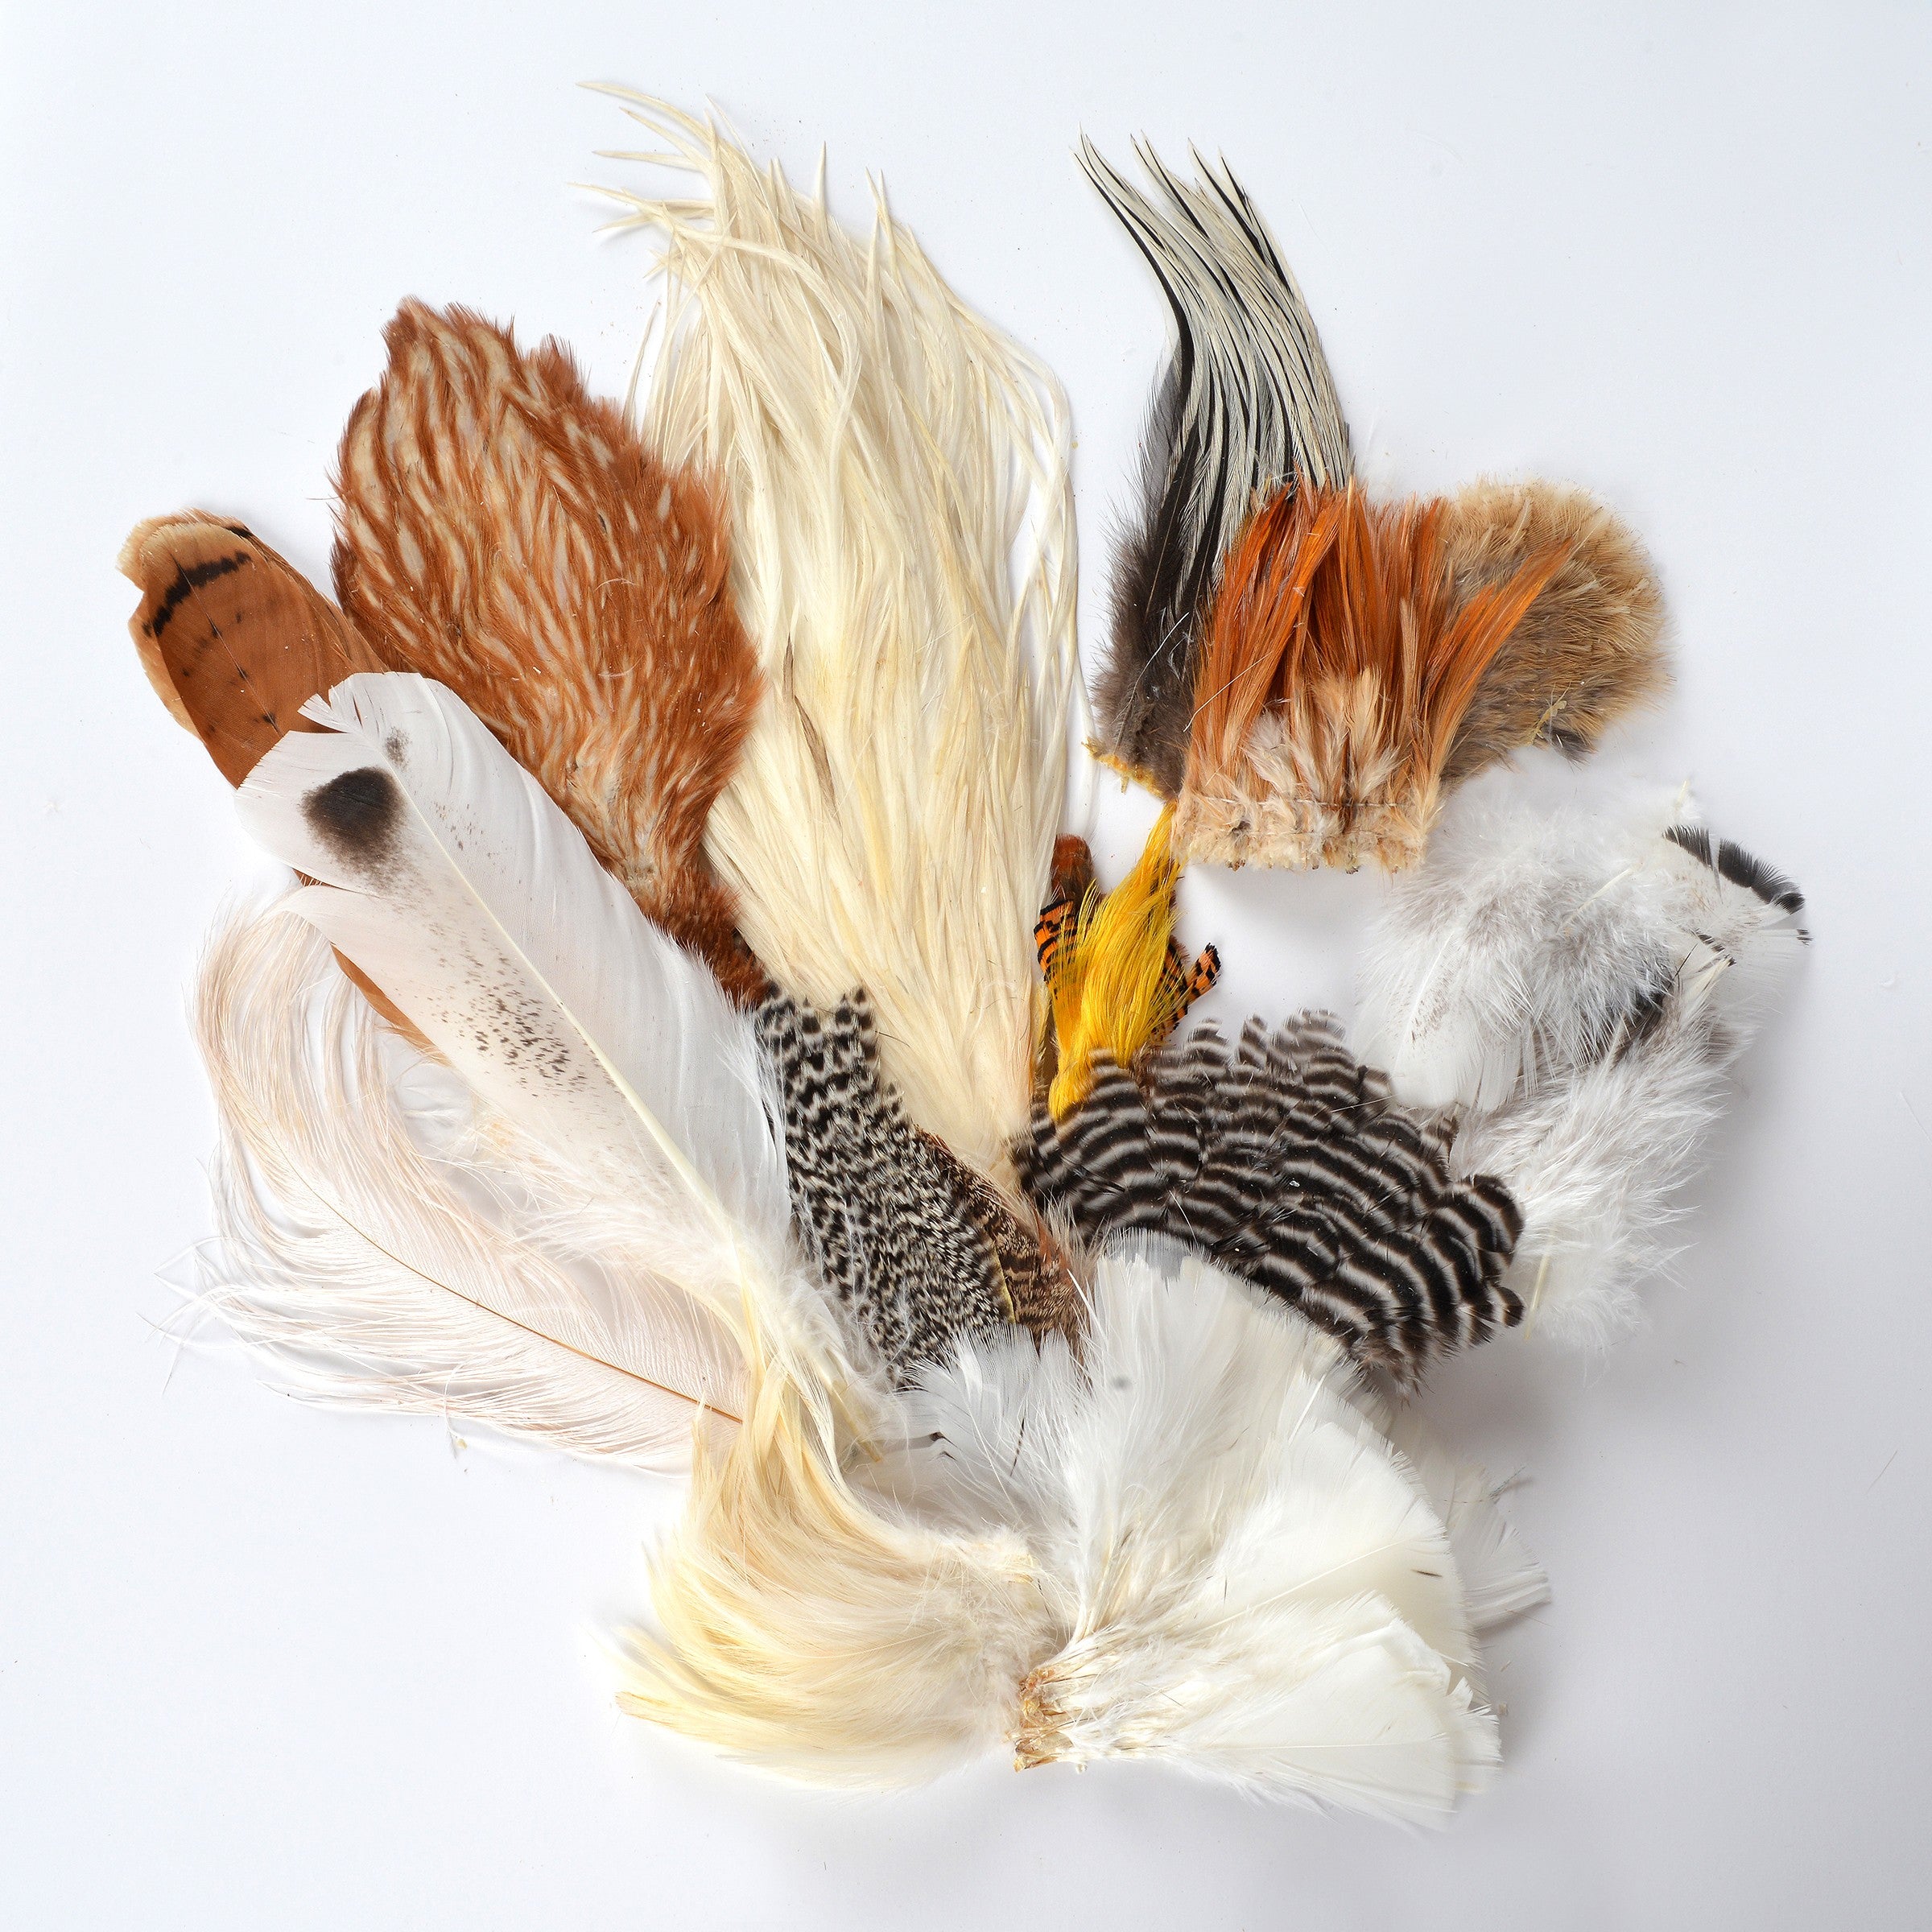 Cruelty Free Feathers 25 Perfect Buff / Gold Feathers From a Buff